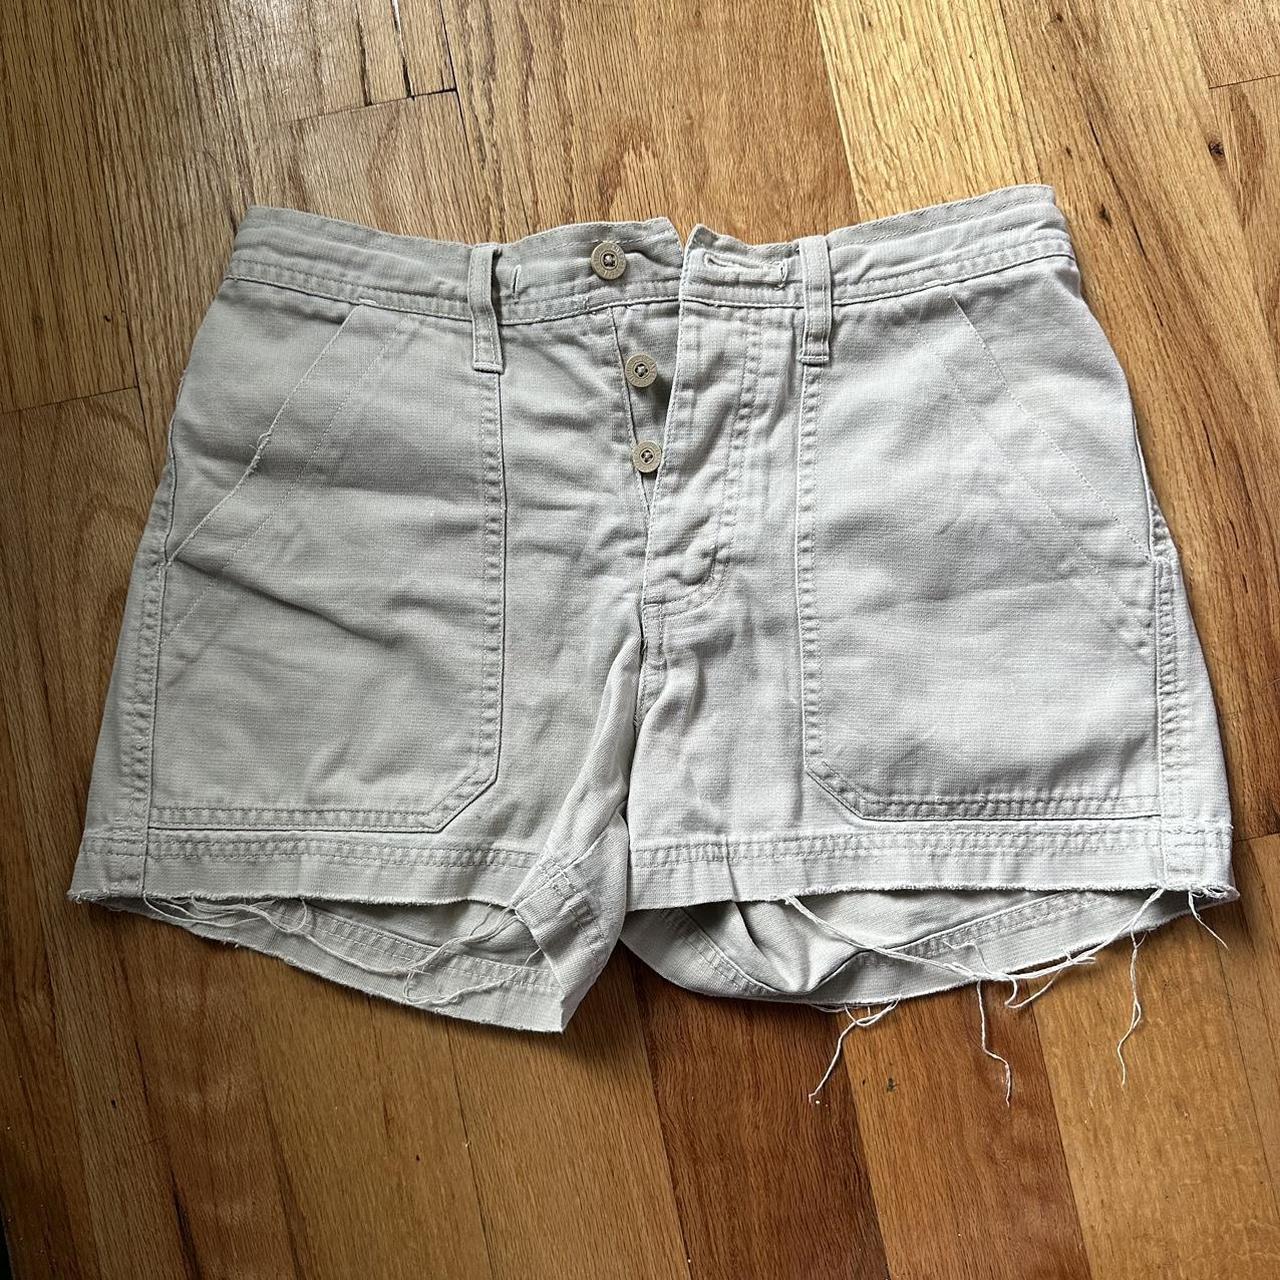 Vintage tan cargo shorts Size 2 Perfect for the... - Depop